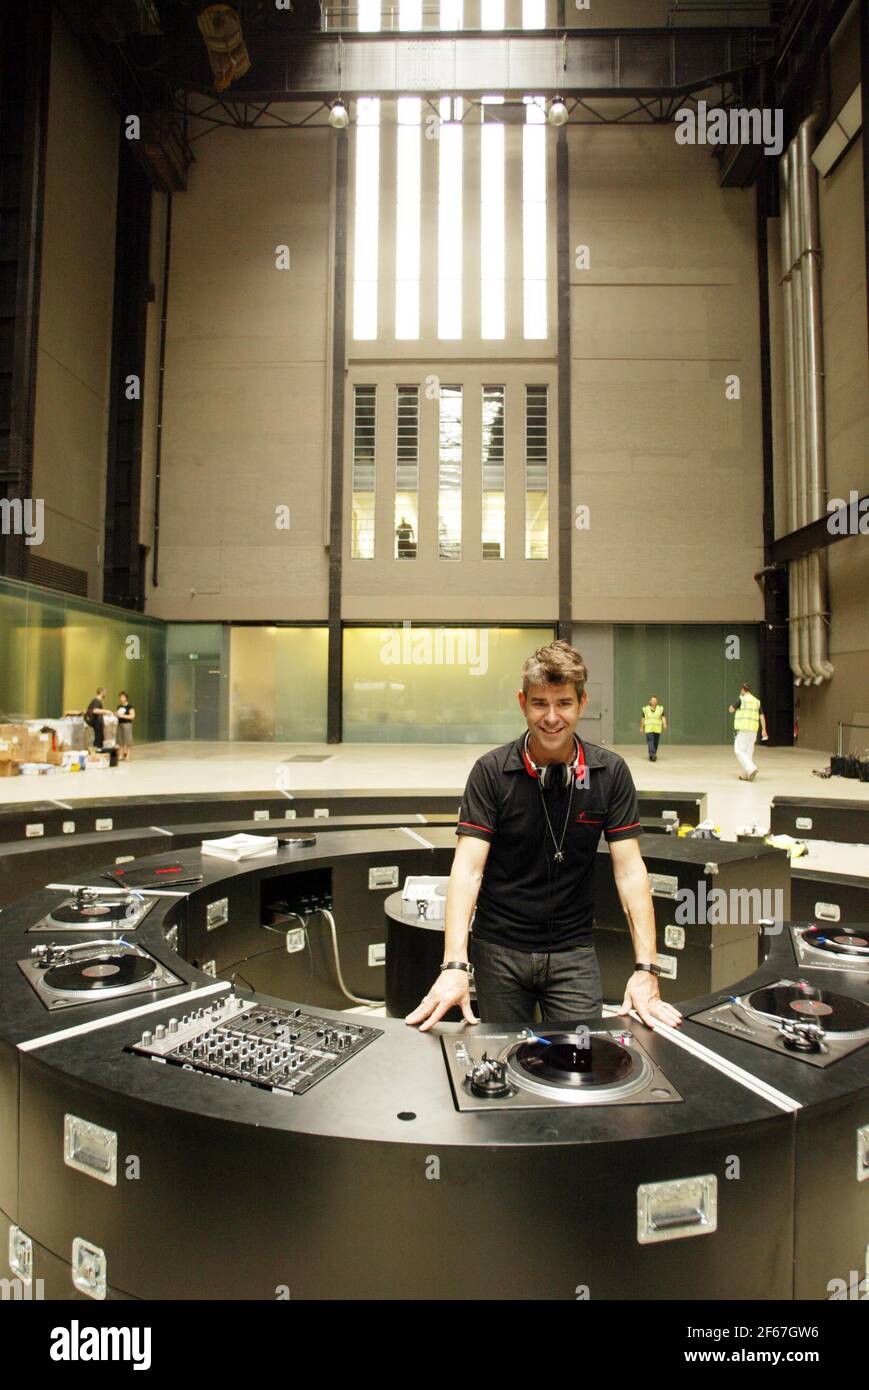 As part of UBS Openings: The Long Weekend, Tate Modern's four day festival for the May Bank Holiday, artist Mathieu Briand has created a massive experimental sound recording studio and performance space, 'The Spiral' which fills the Turbine Hall  pic David Sandison Stock Photo